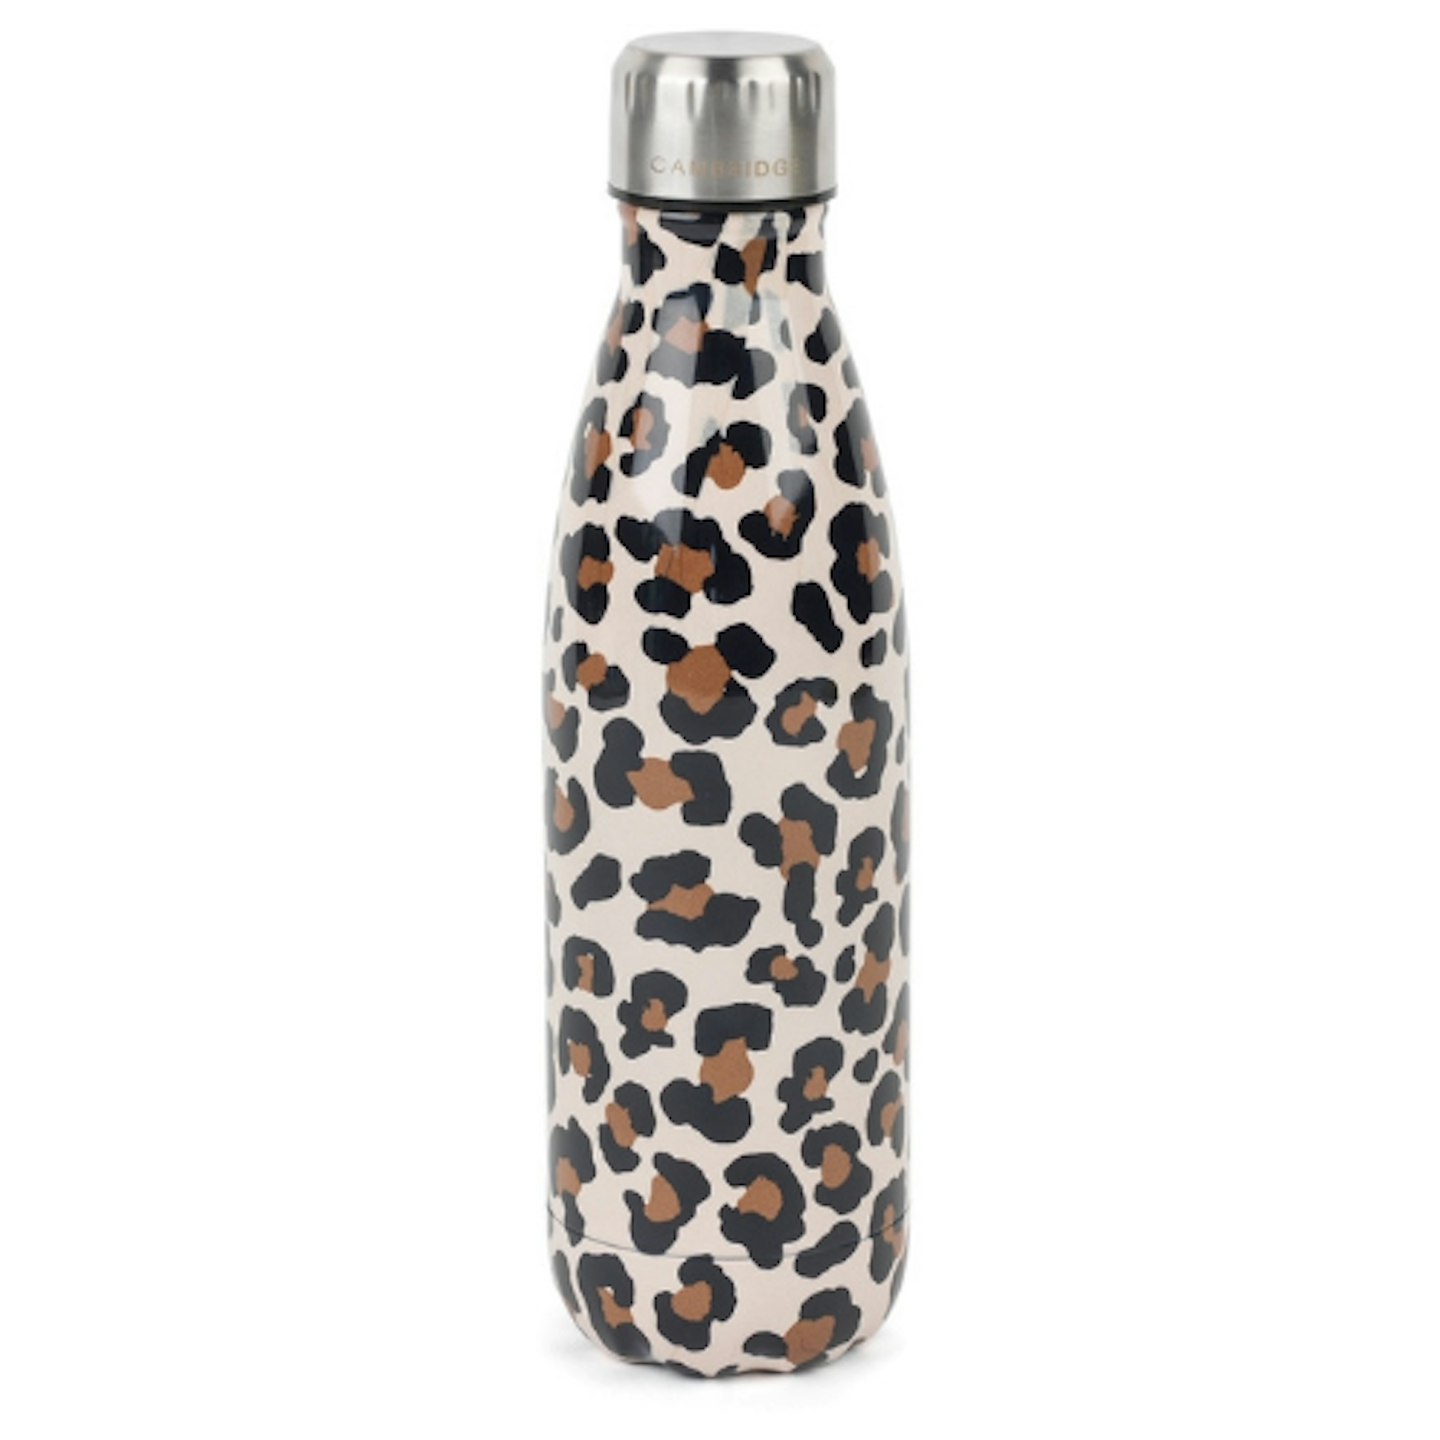 Cambridge Stainless Steel Thermal Insulated Flask Bottle